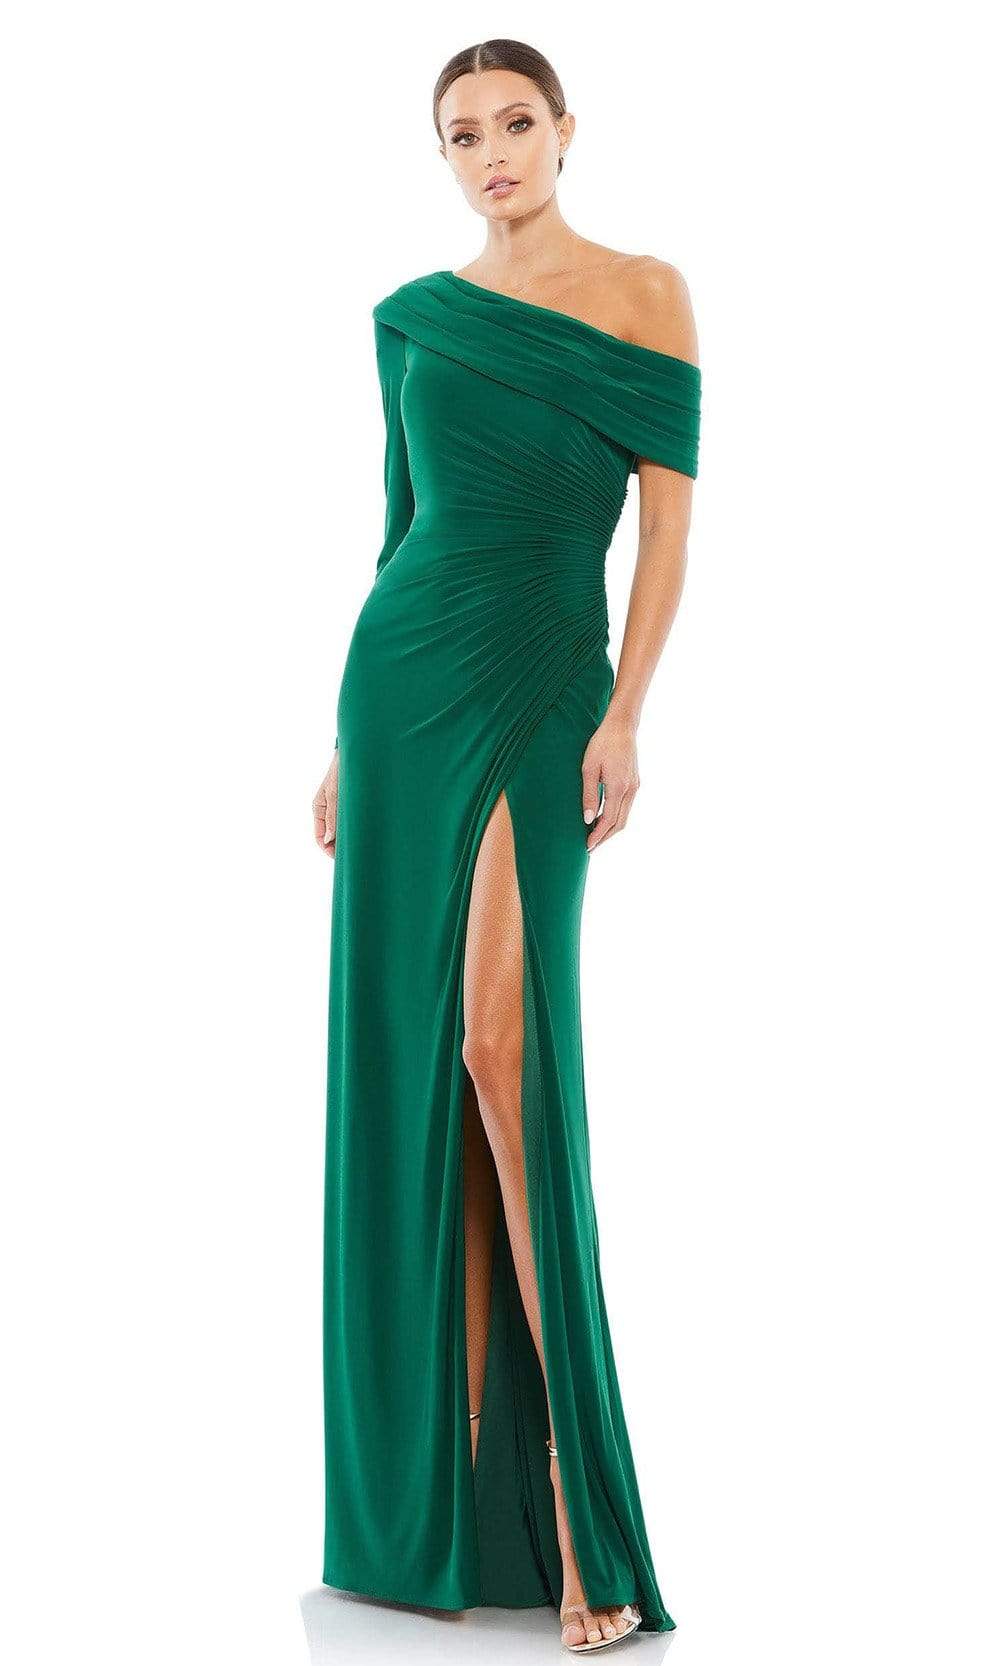 Ieena Duggal - 26570 Draped One Shoulder Gown Special Occasion Dress 0 / Emerald Green